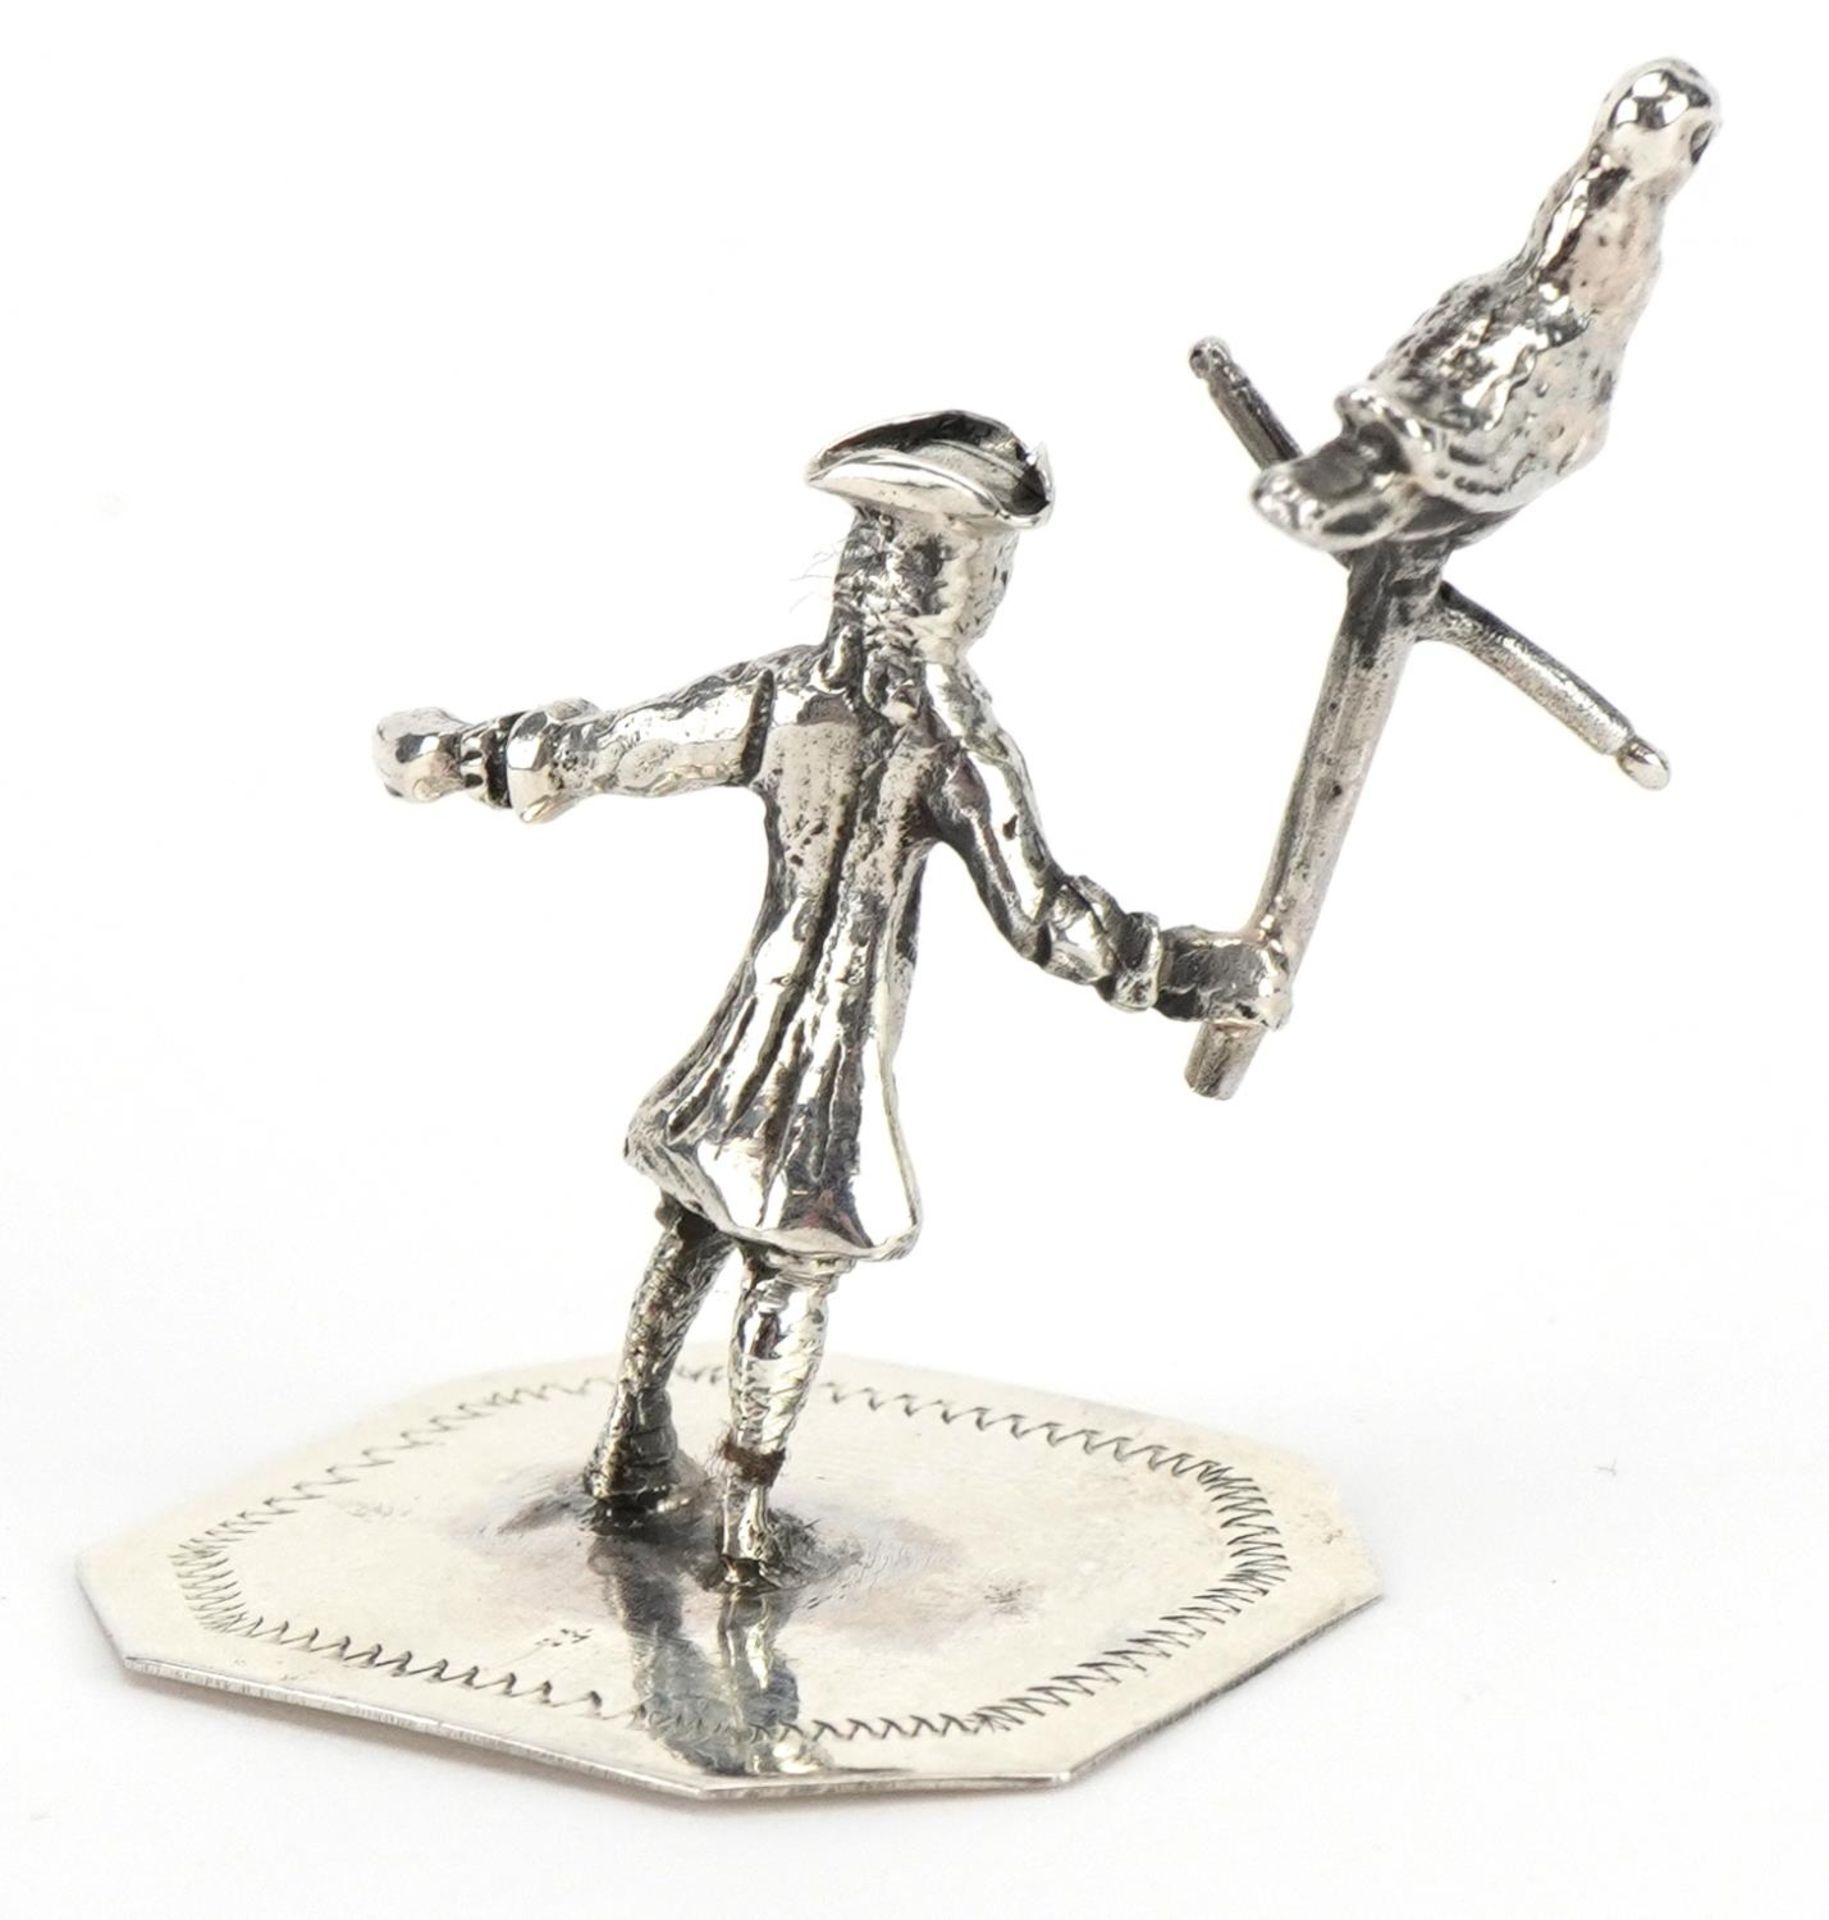 Miniature sterling silver figure of a gentleman holding a bird on a perch, 4cm high, 13.5g - Image 2 of 4